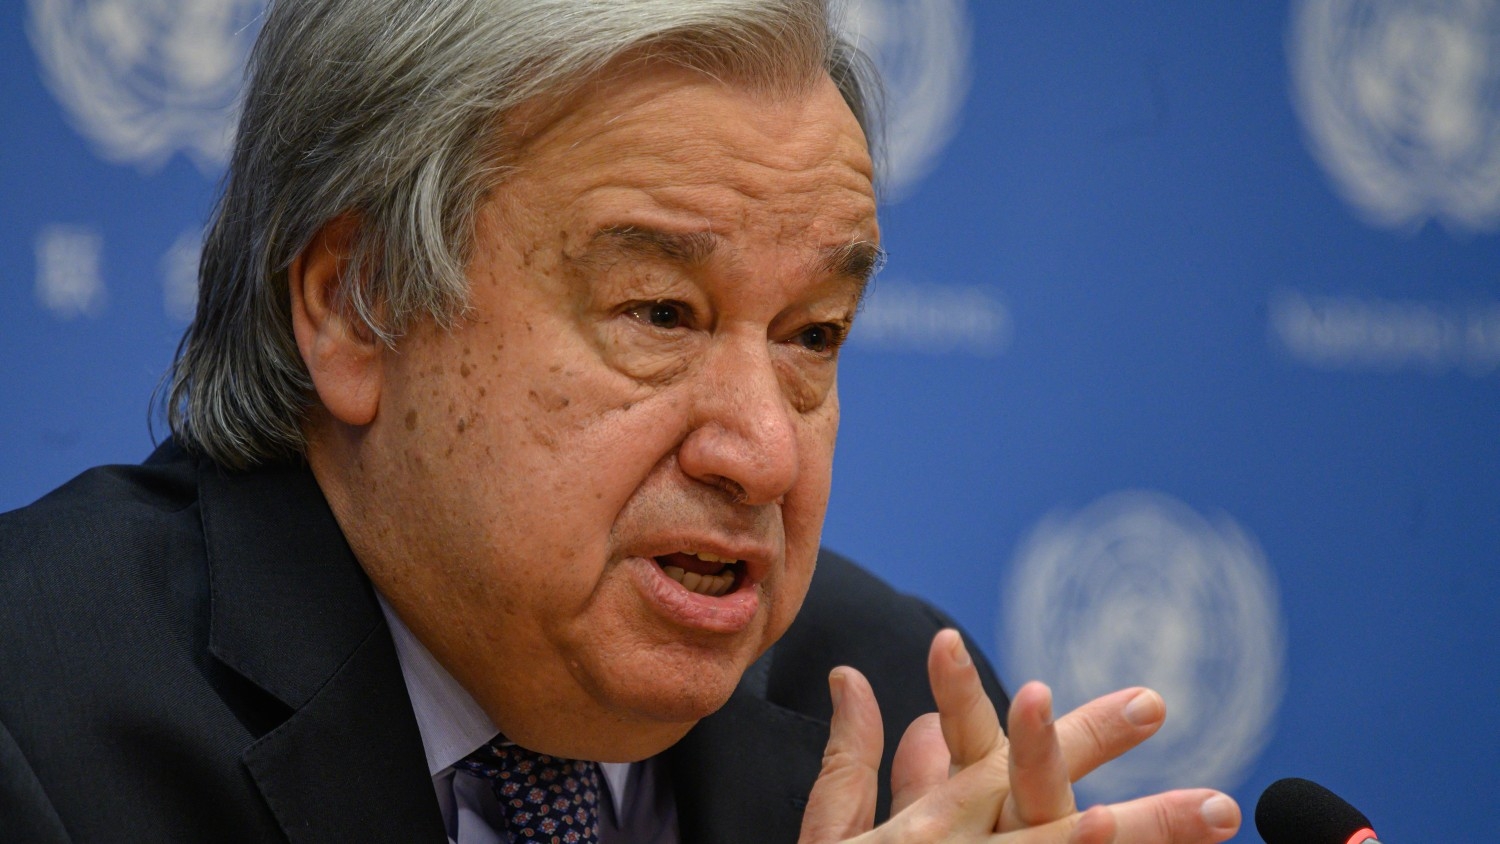 UN Secretary-General Antonio Guterres delivers remarks during the End of Year Press Conference at the UN headquarters in New York City on 19 December 2022.